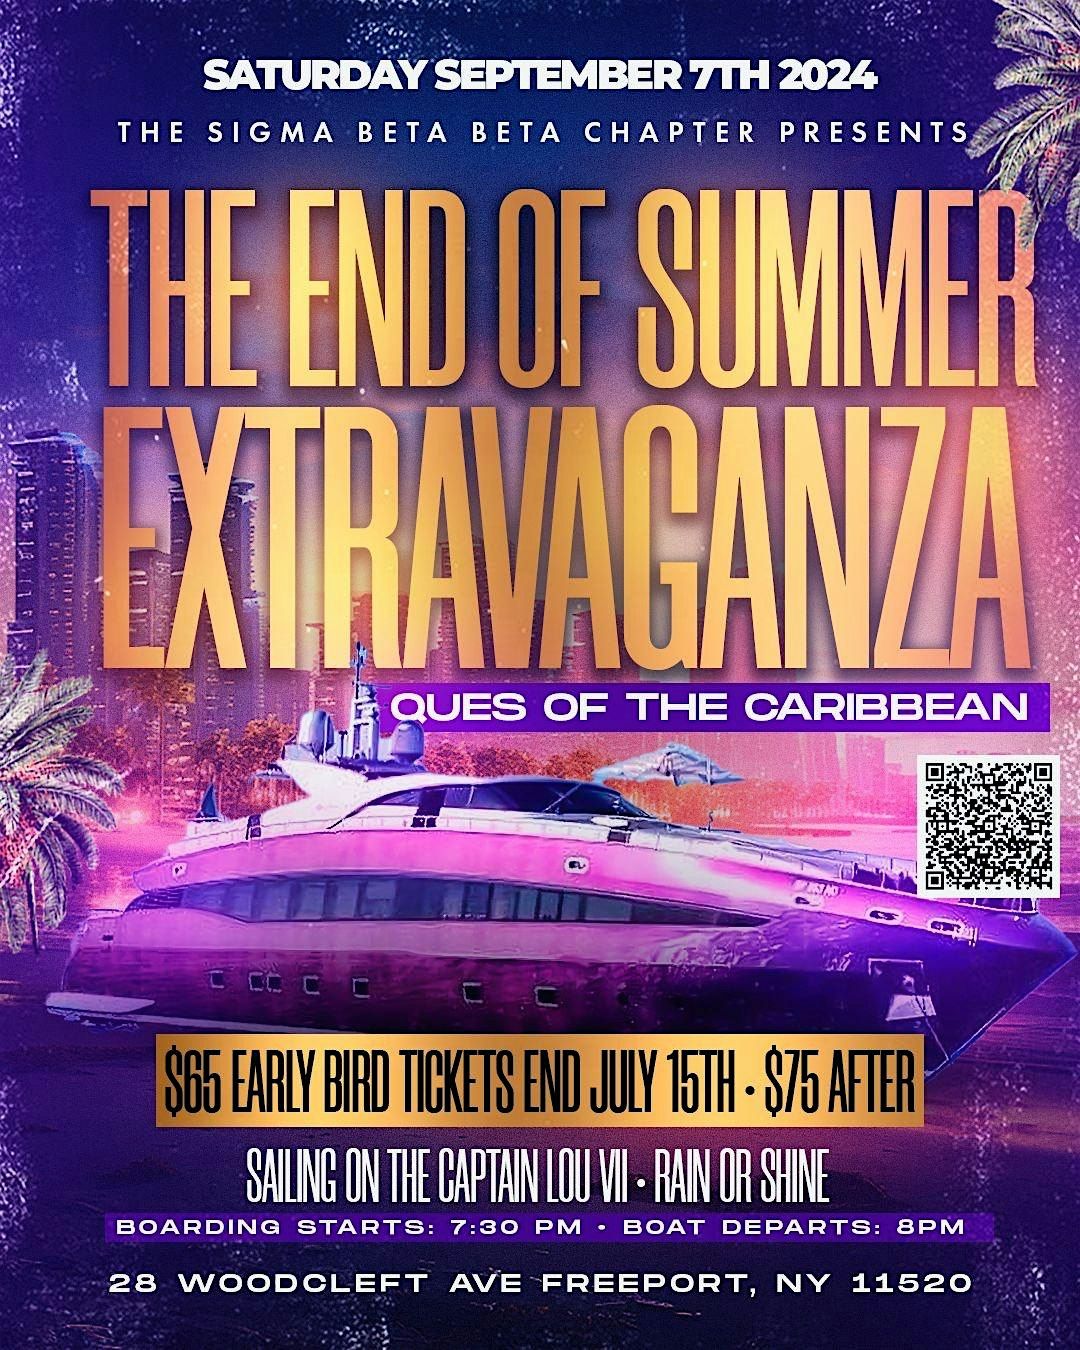 QUES OF THE CARIBBEAN PRESENTS "END OF SUMMER EXTRAVAGANZA"